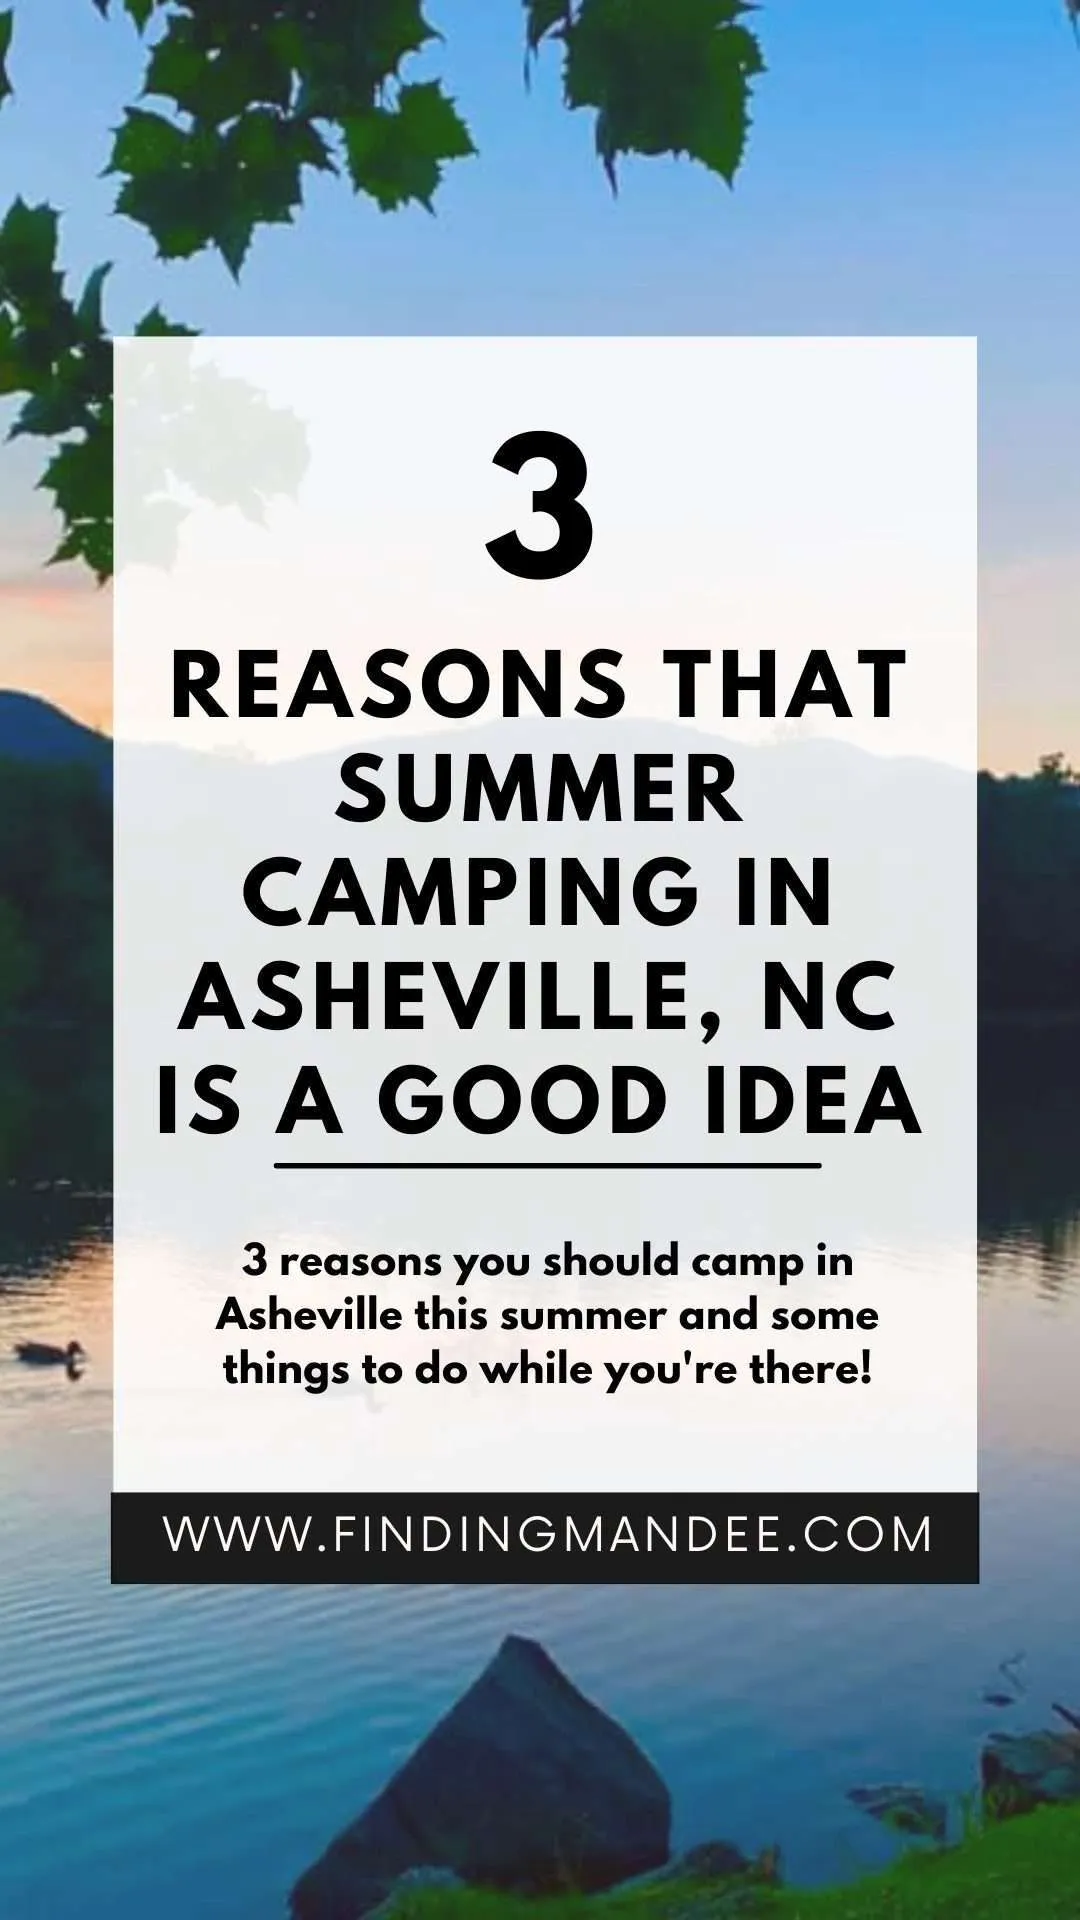 3 Reasons that Summer Camping in Asheville, NC is a Good Idea | Finding Mandee